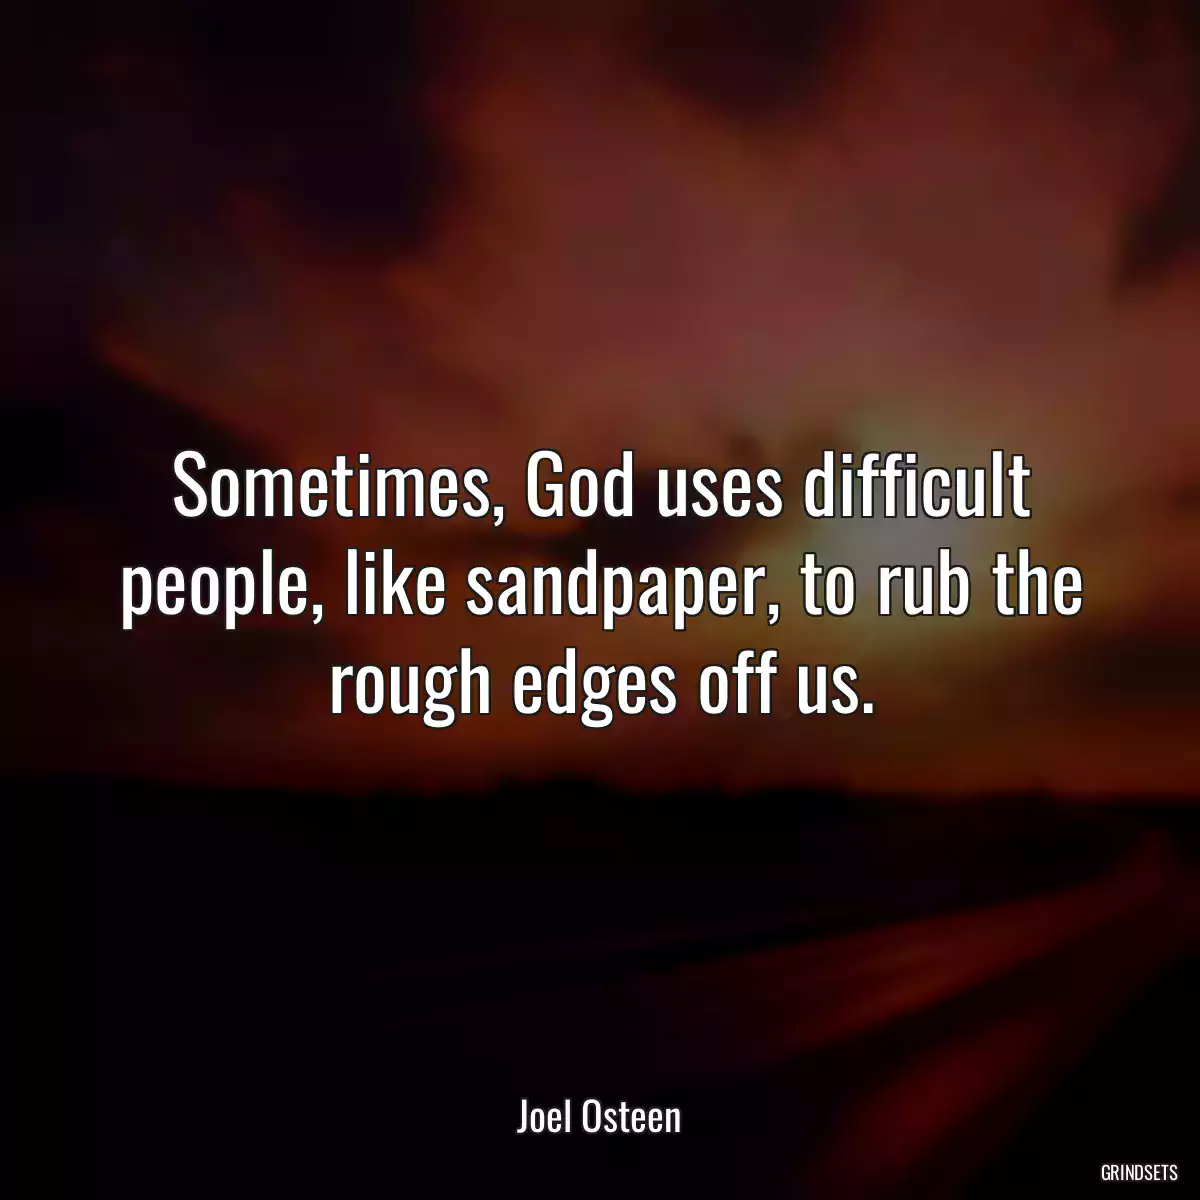 Sometimes, God uses difficult people, like sandpaper, to rub the rough edges off us.